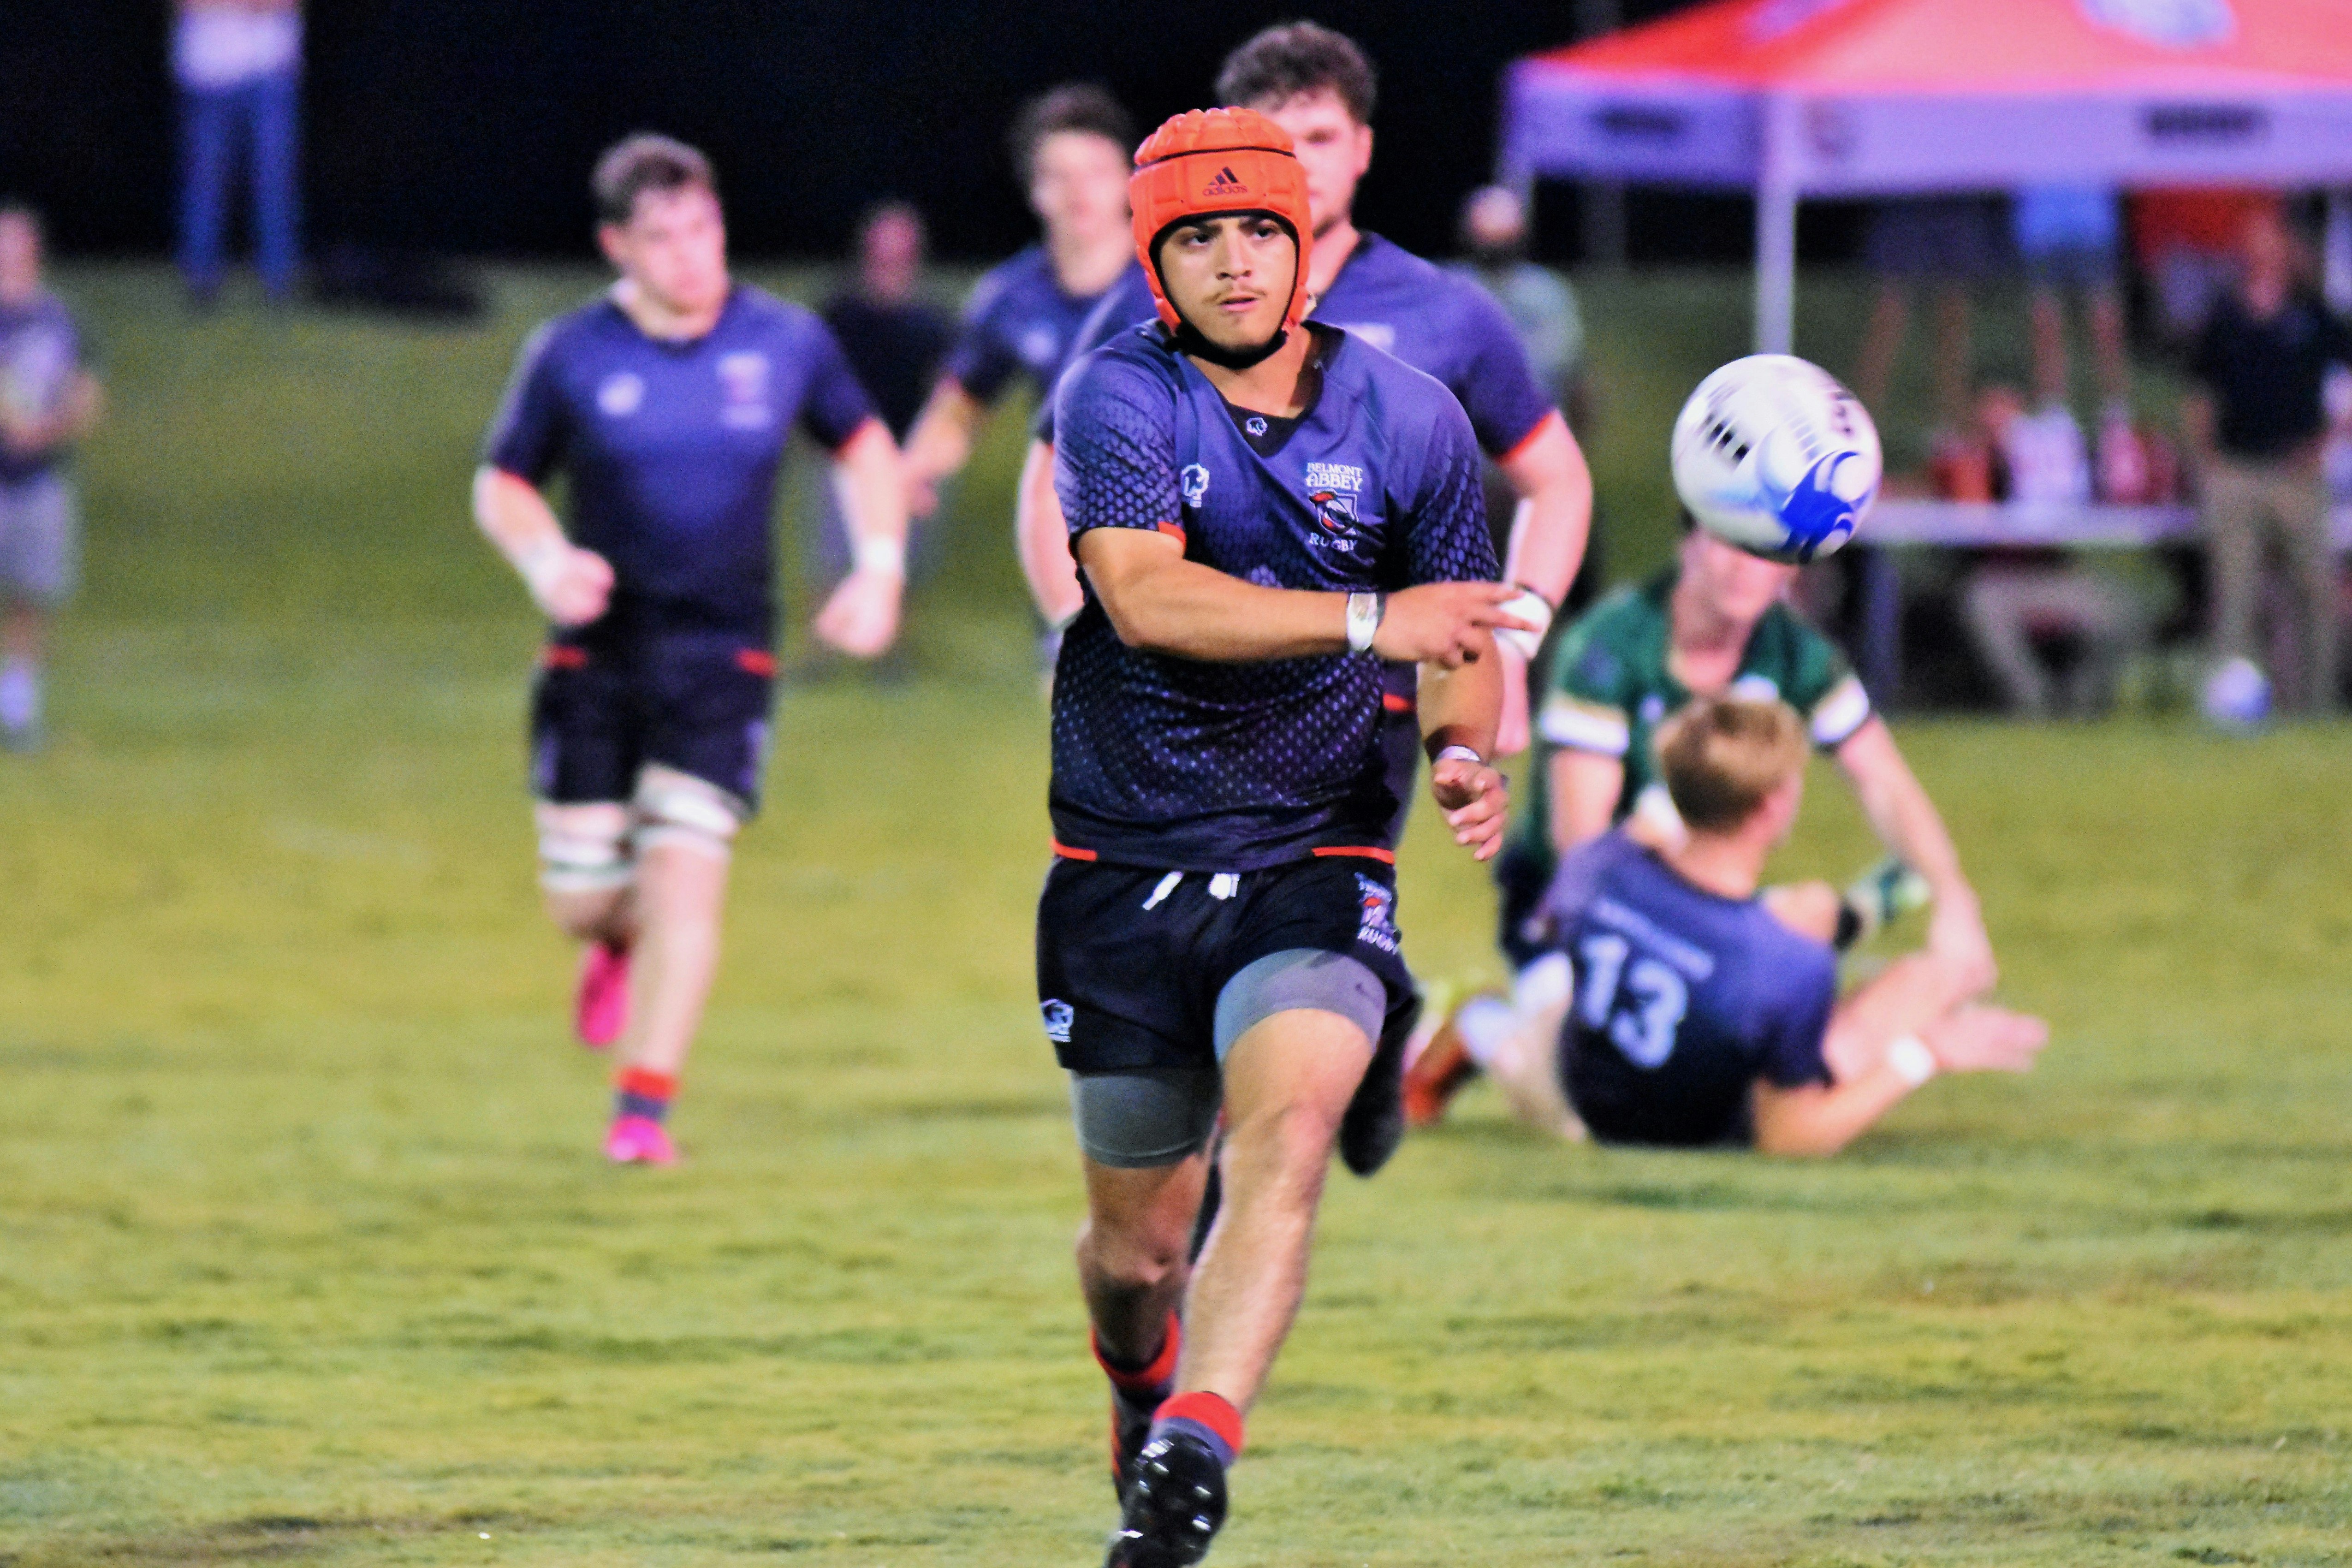 A Belmont Abbey College player throws the ball to a teammate during a night rugby game in Gastonia.